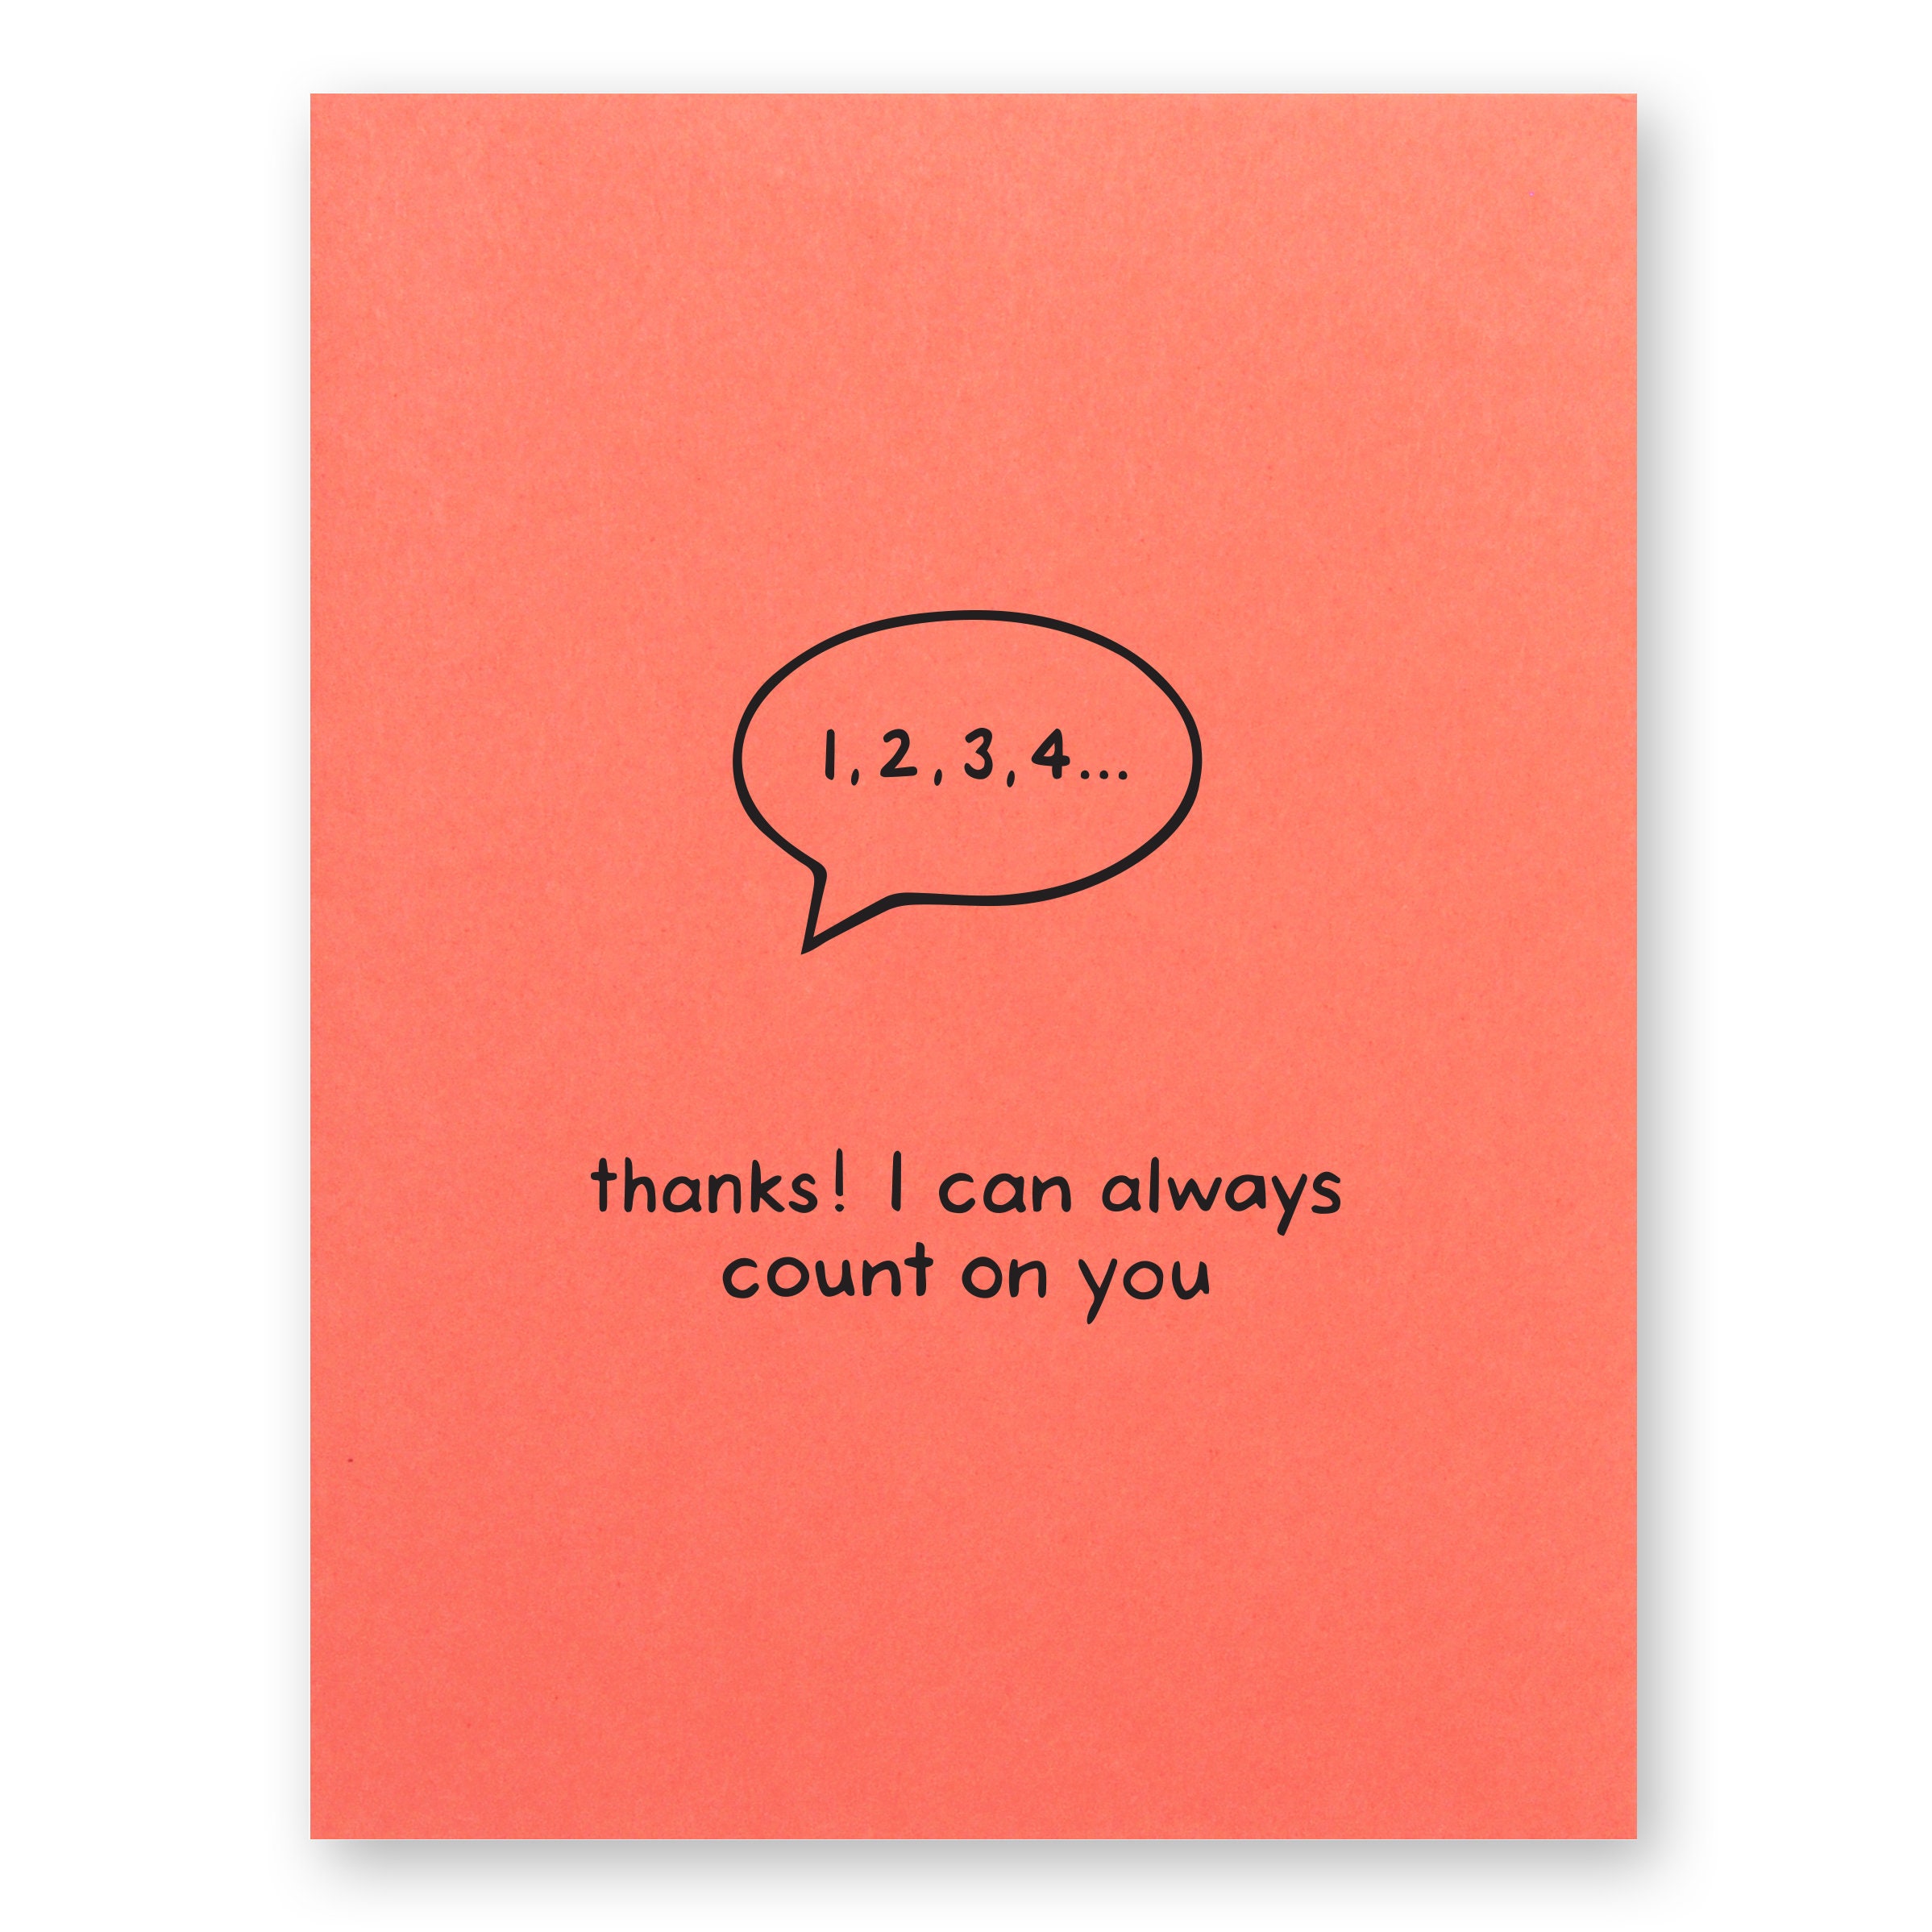 Thank you card Greeting Card by Madame Memento